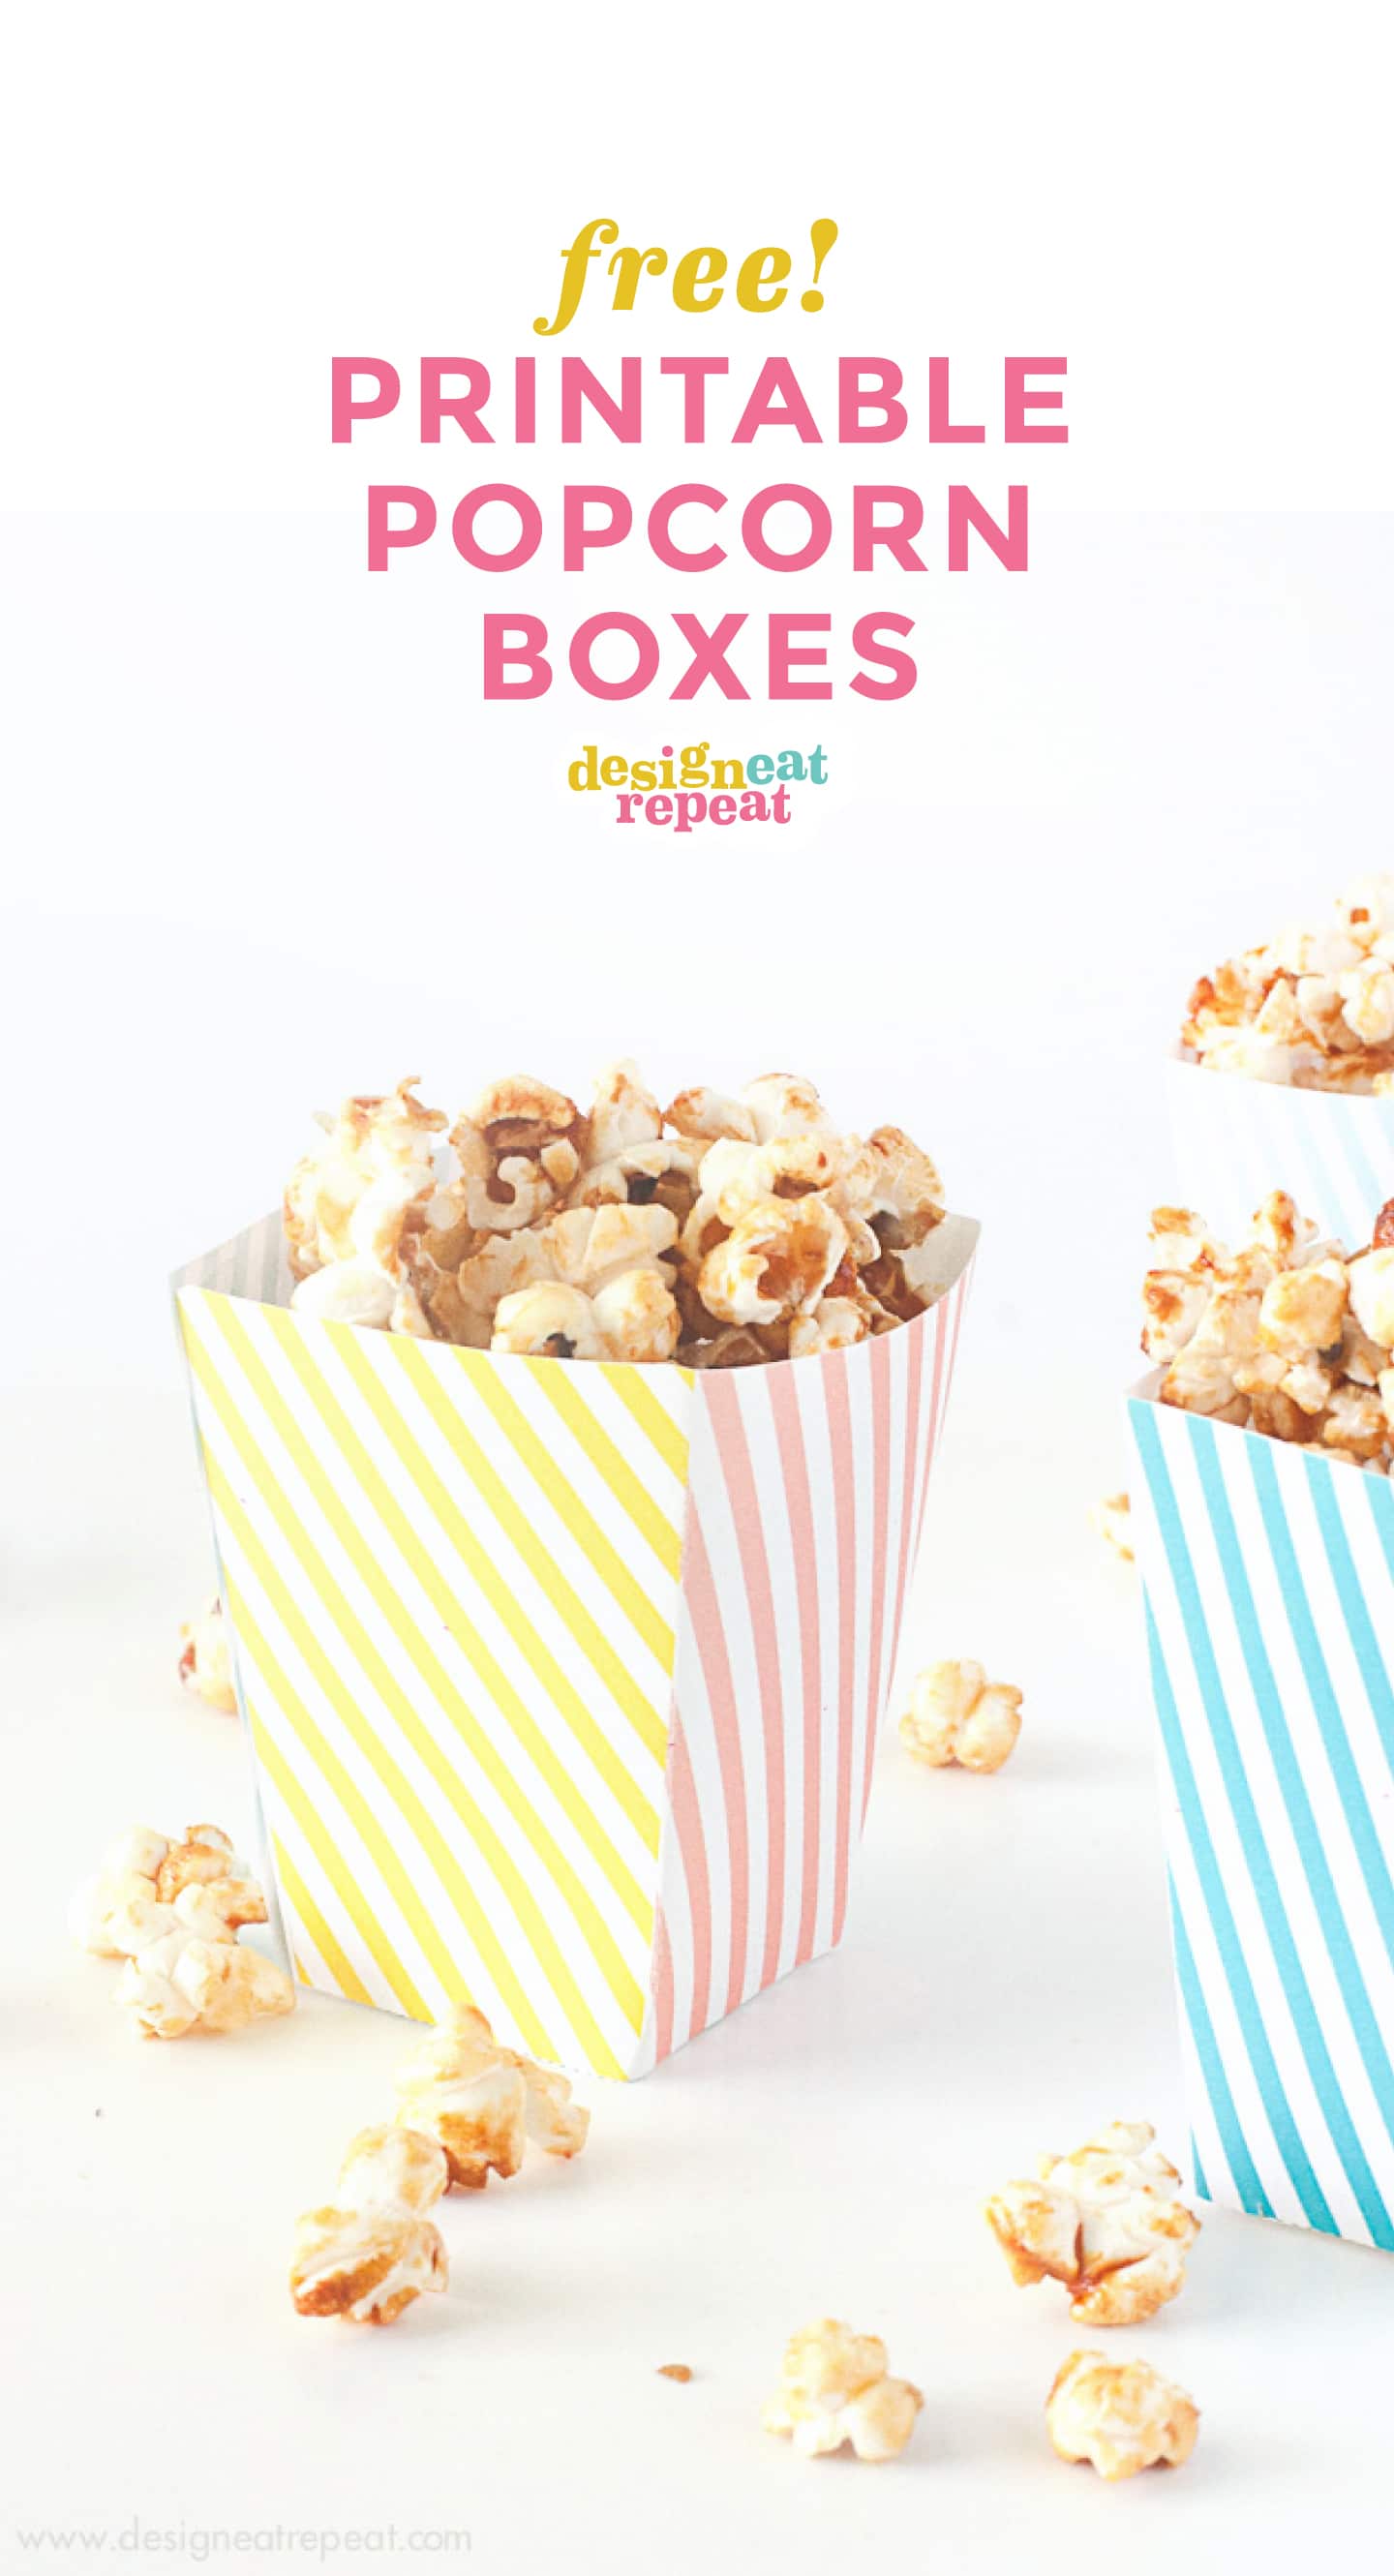 Pink, yellow, and blue striped free printable popcorn box template for birthday, circus party, baby shower.